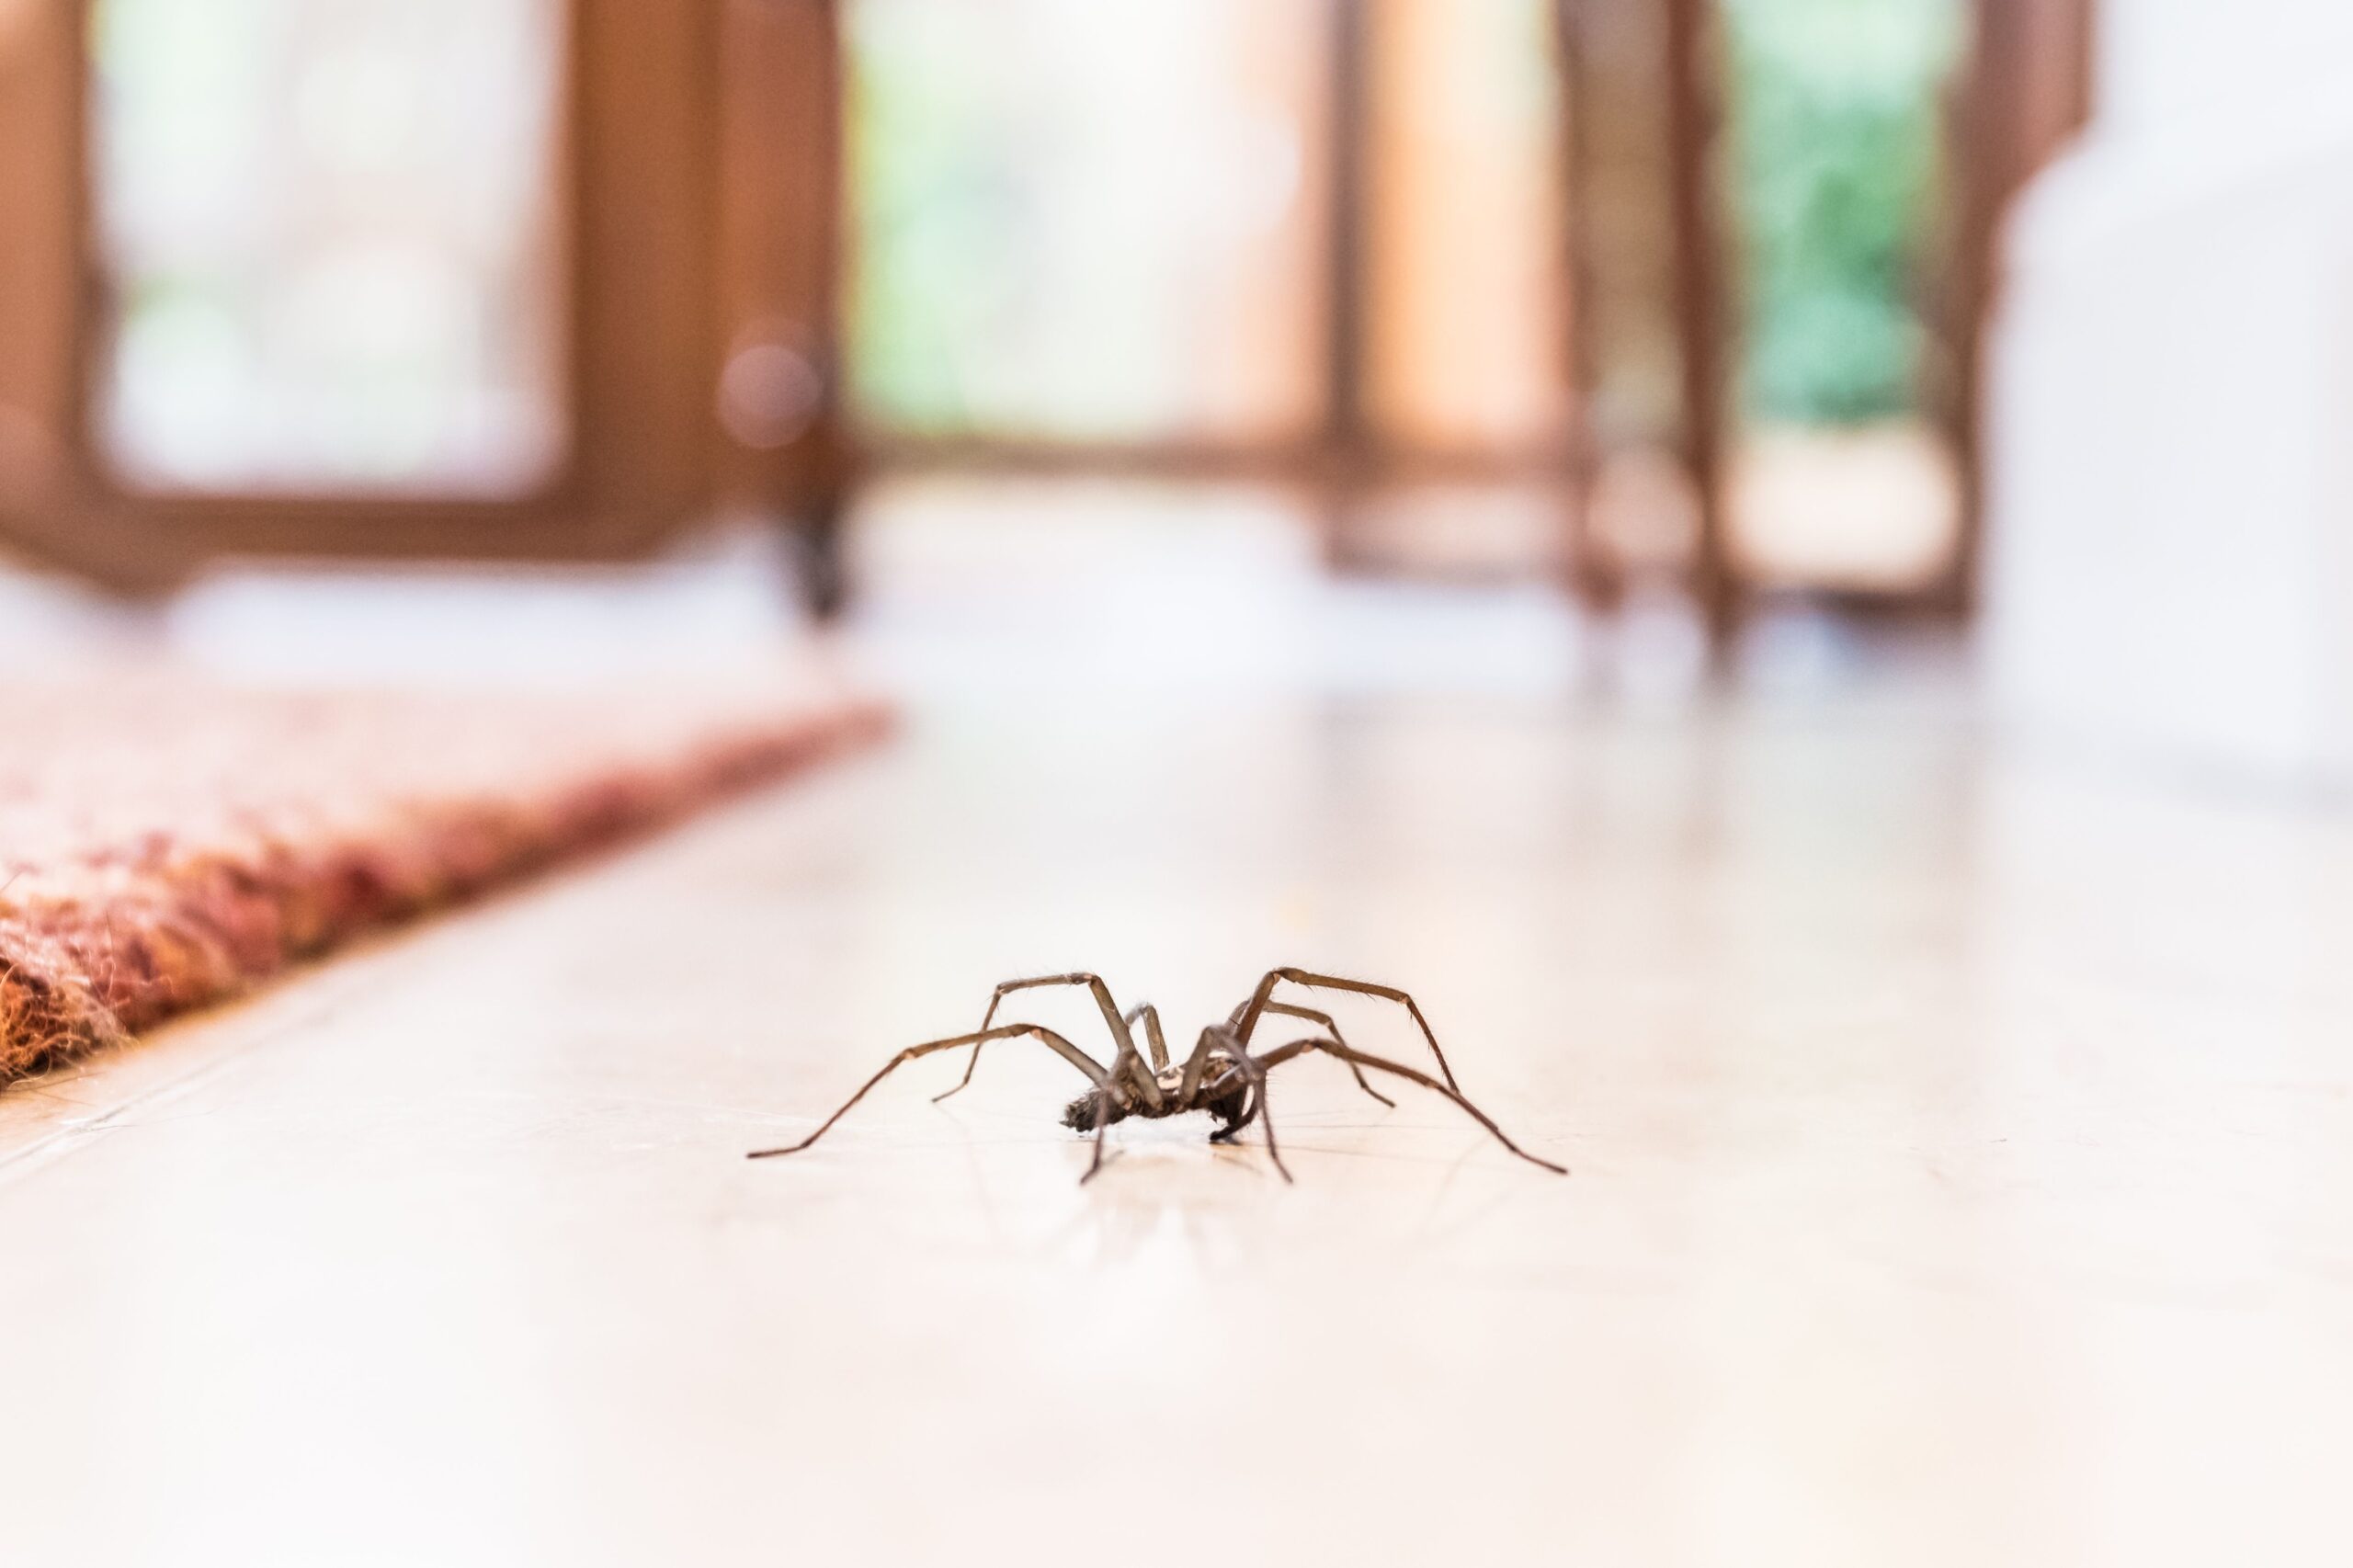 How Long Will a Spider Stay in Your Room